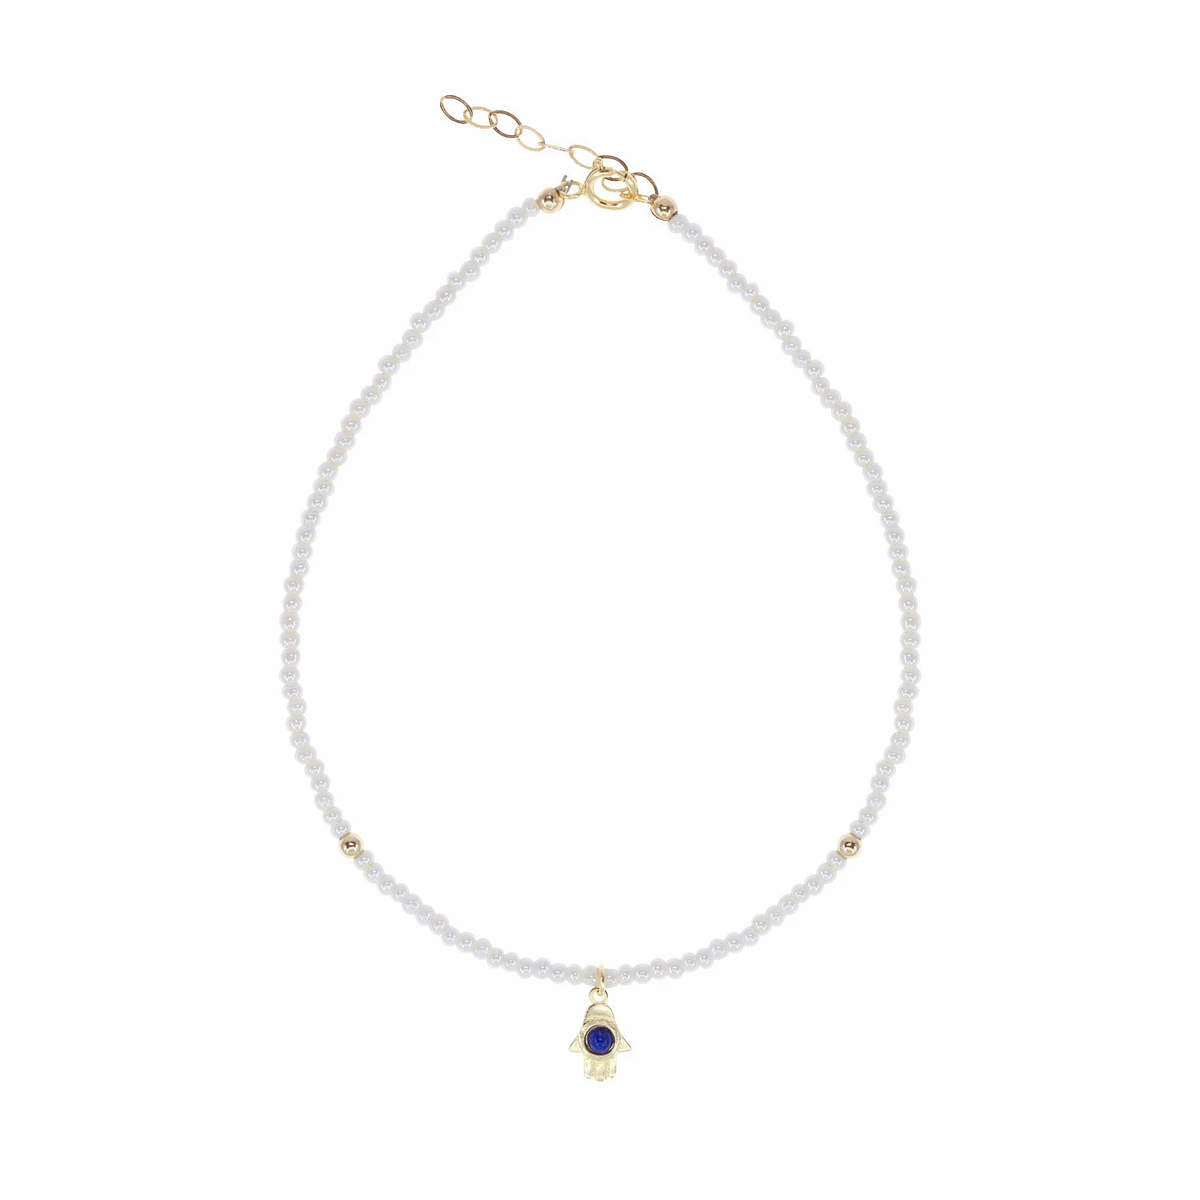 Tranquility In Reach Anklet in White